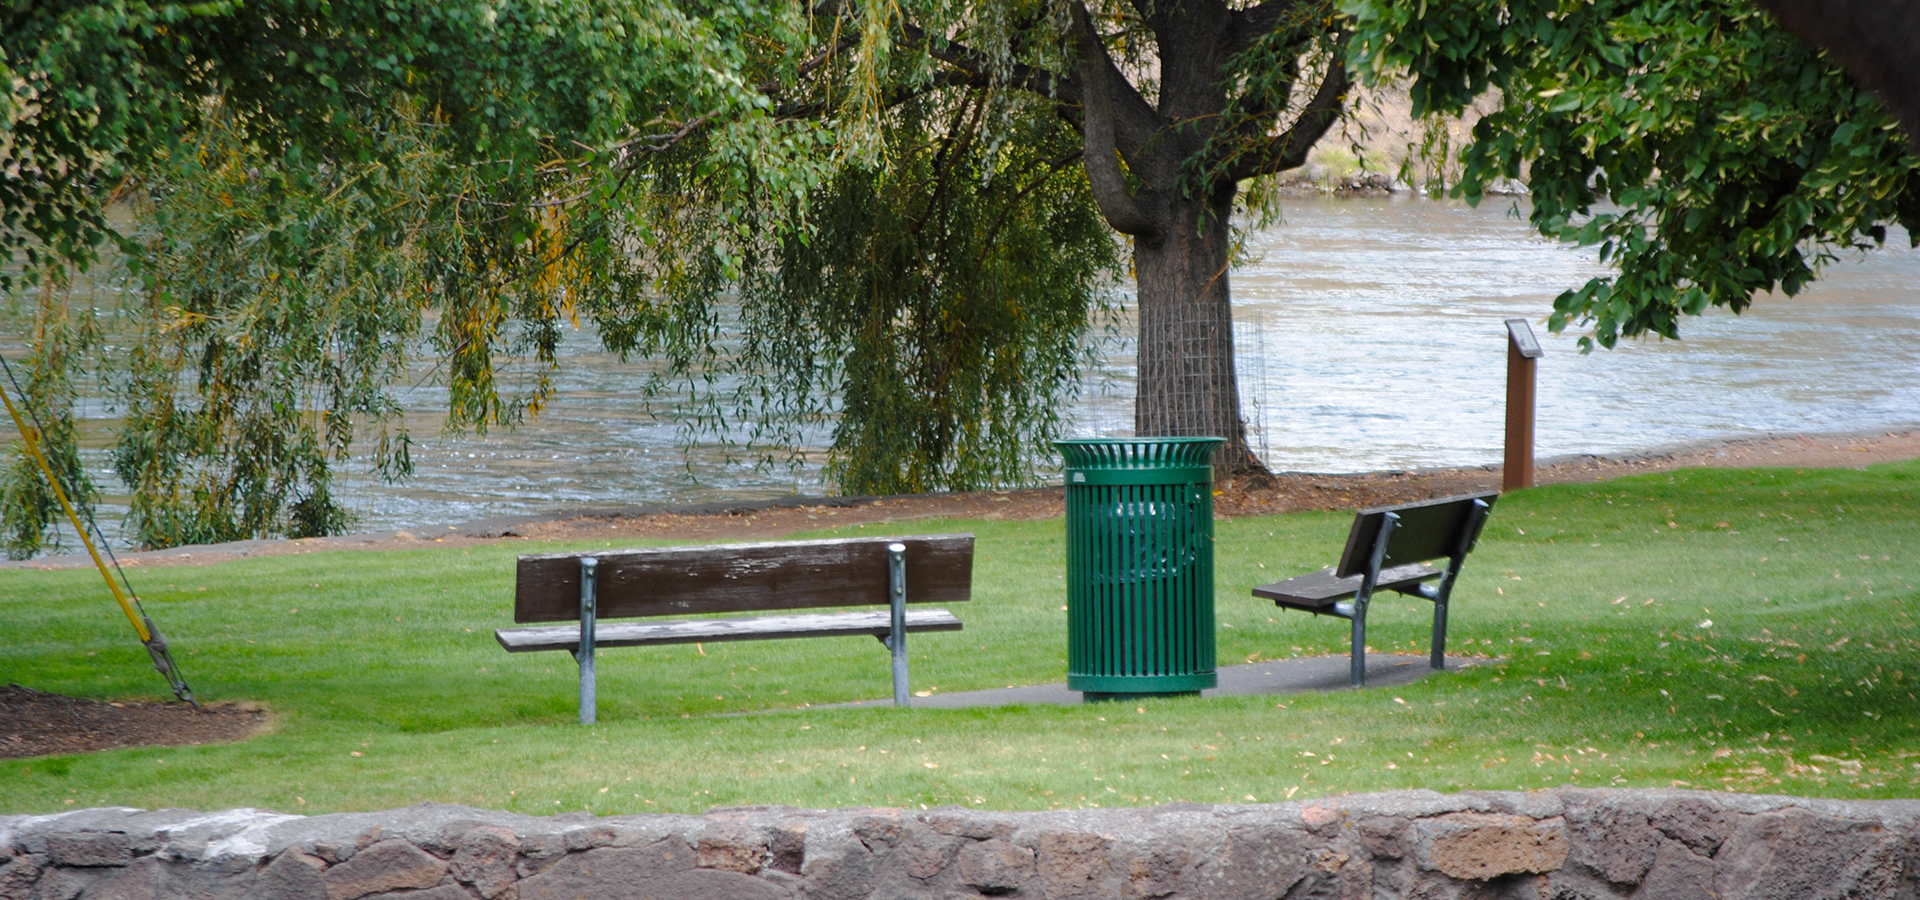 Park benches at Pacific Park in Bend.